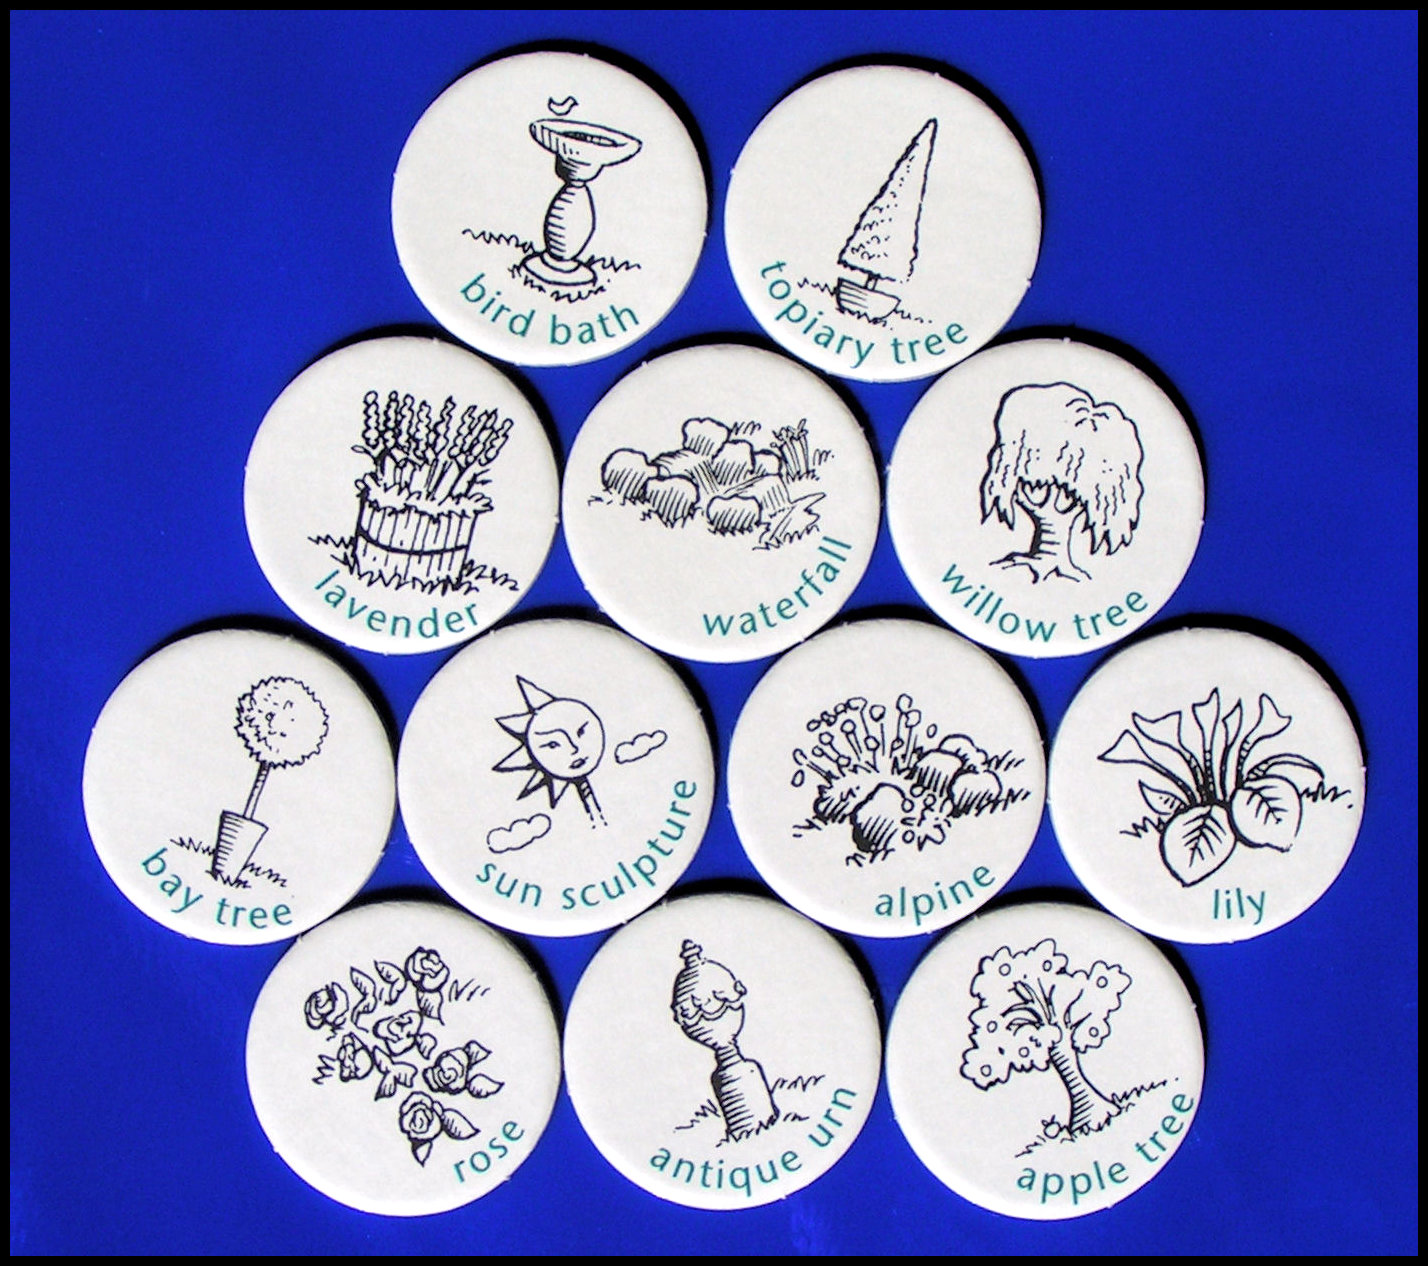 The Chelsea Flower Show Game - Inspiration Tokens